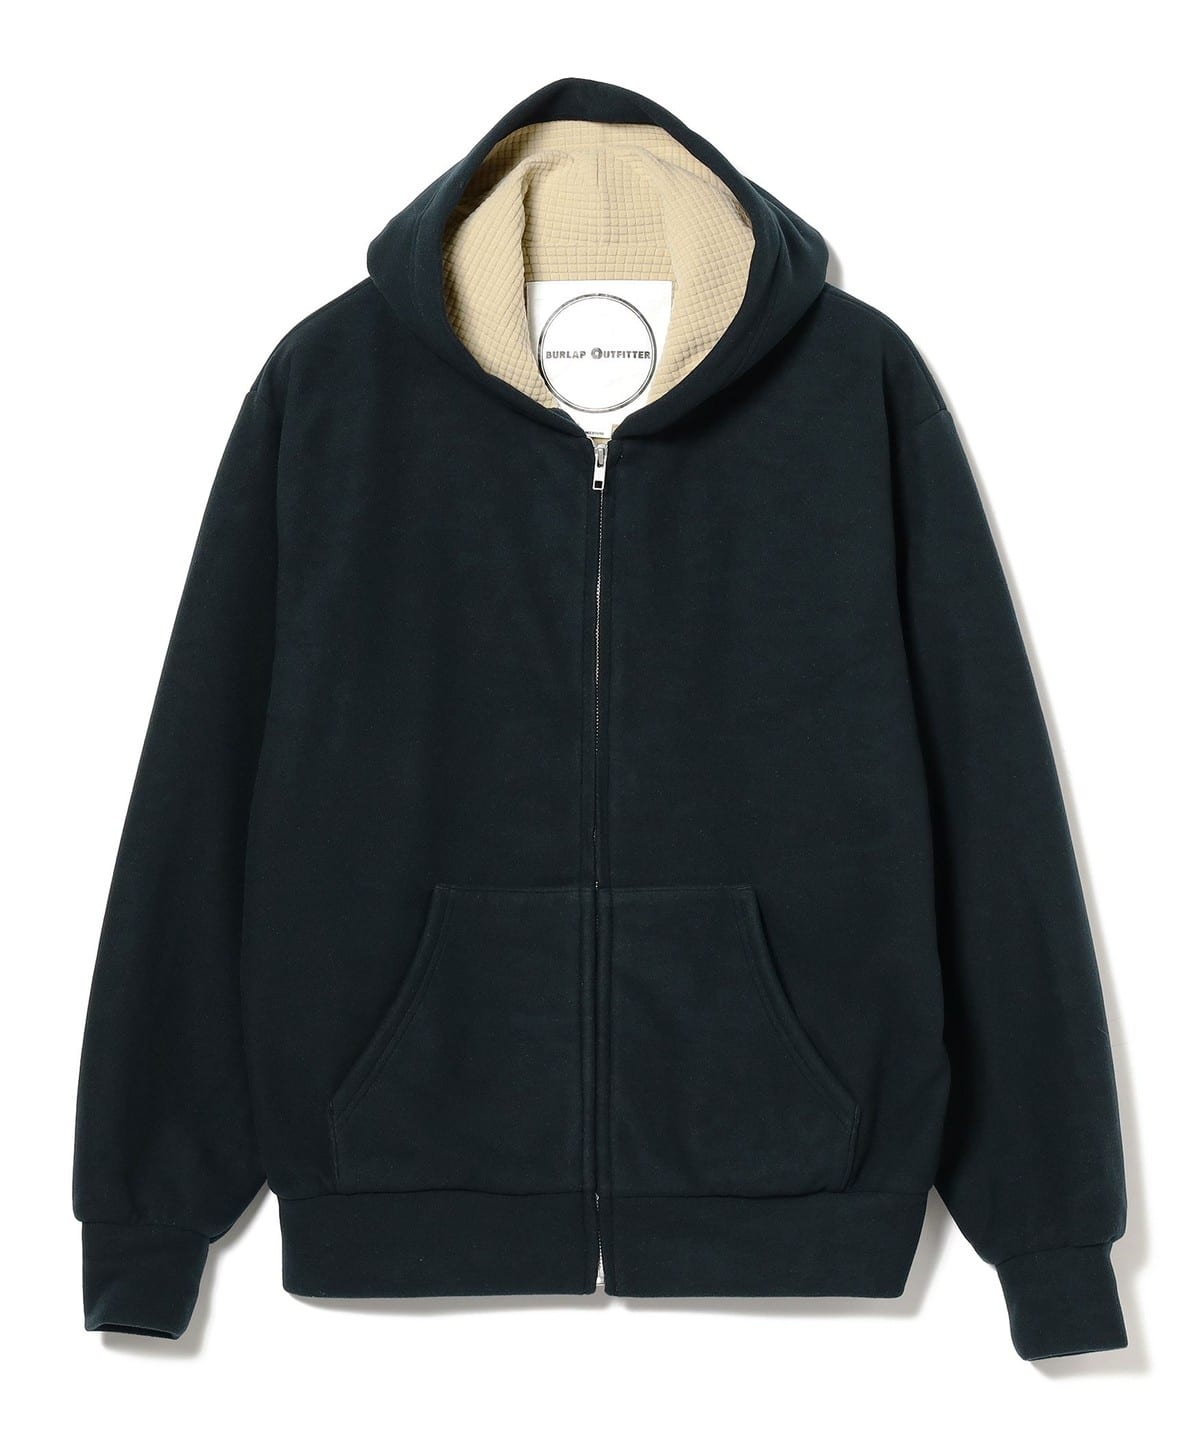 B:MING by BEAMS B:MING by BEAMS BURLAP OUTFITTER / POLARTEC Fleece